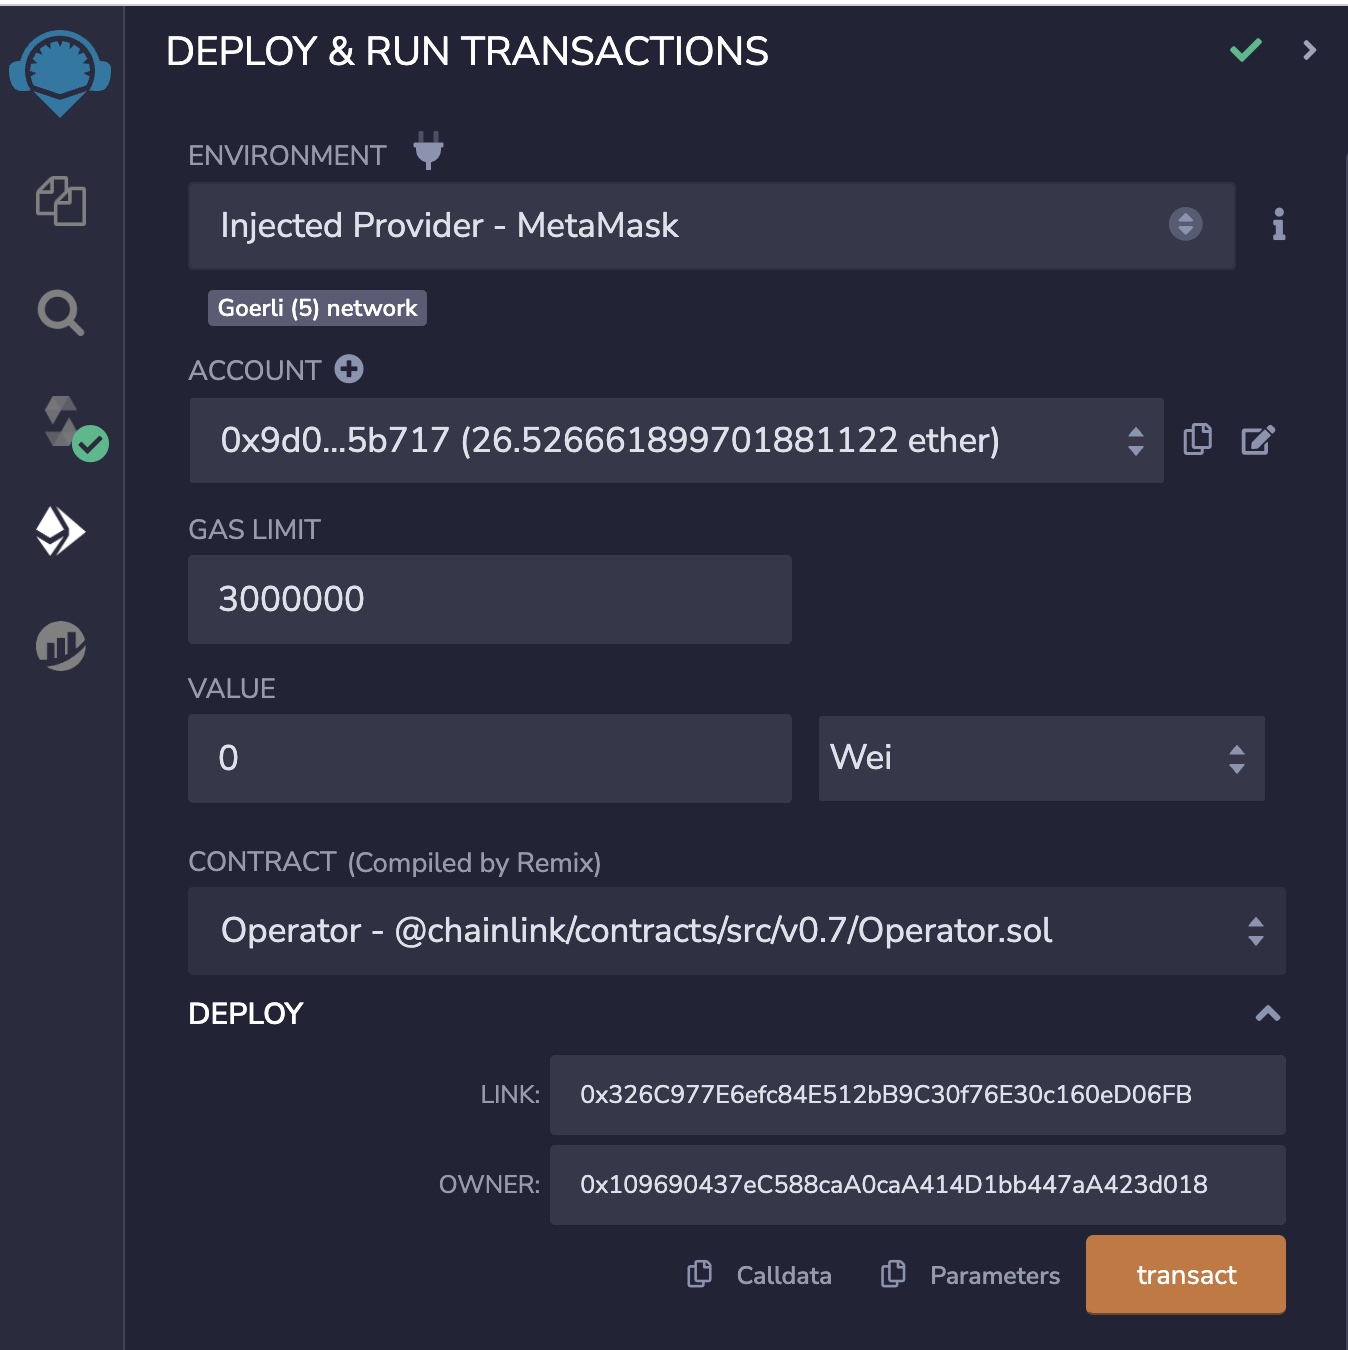 The Deploy & Run transaction window showing Injected Web 3 selected and the address for your MetaMask wallet.